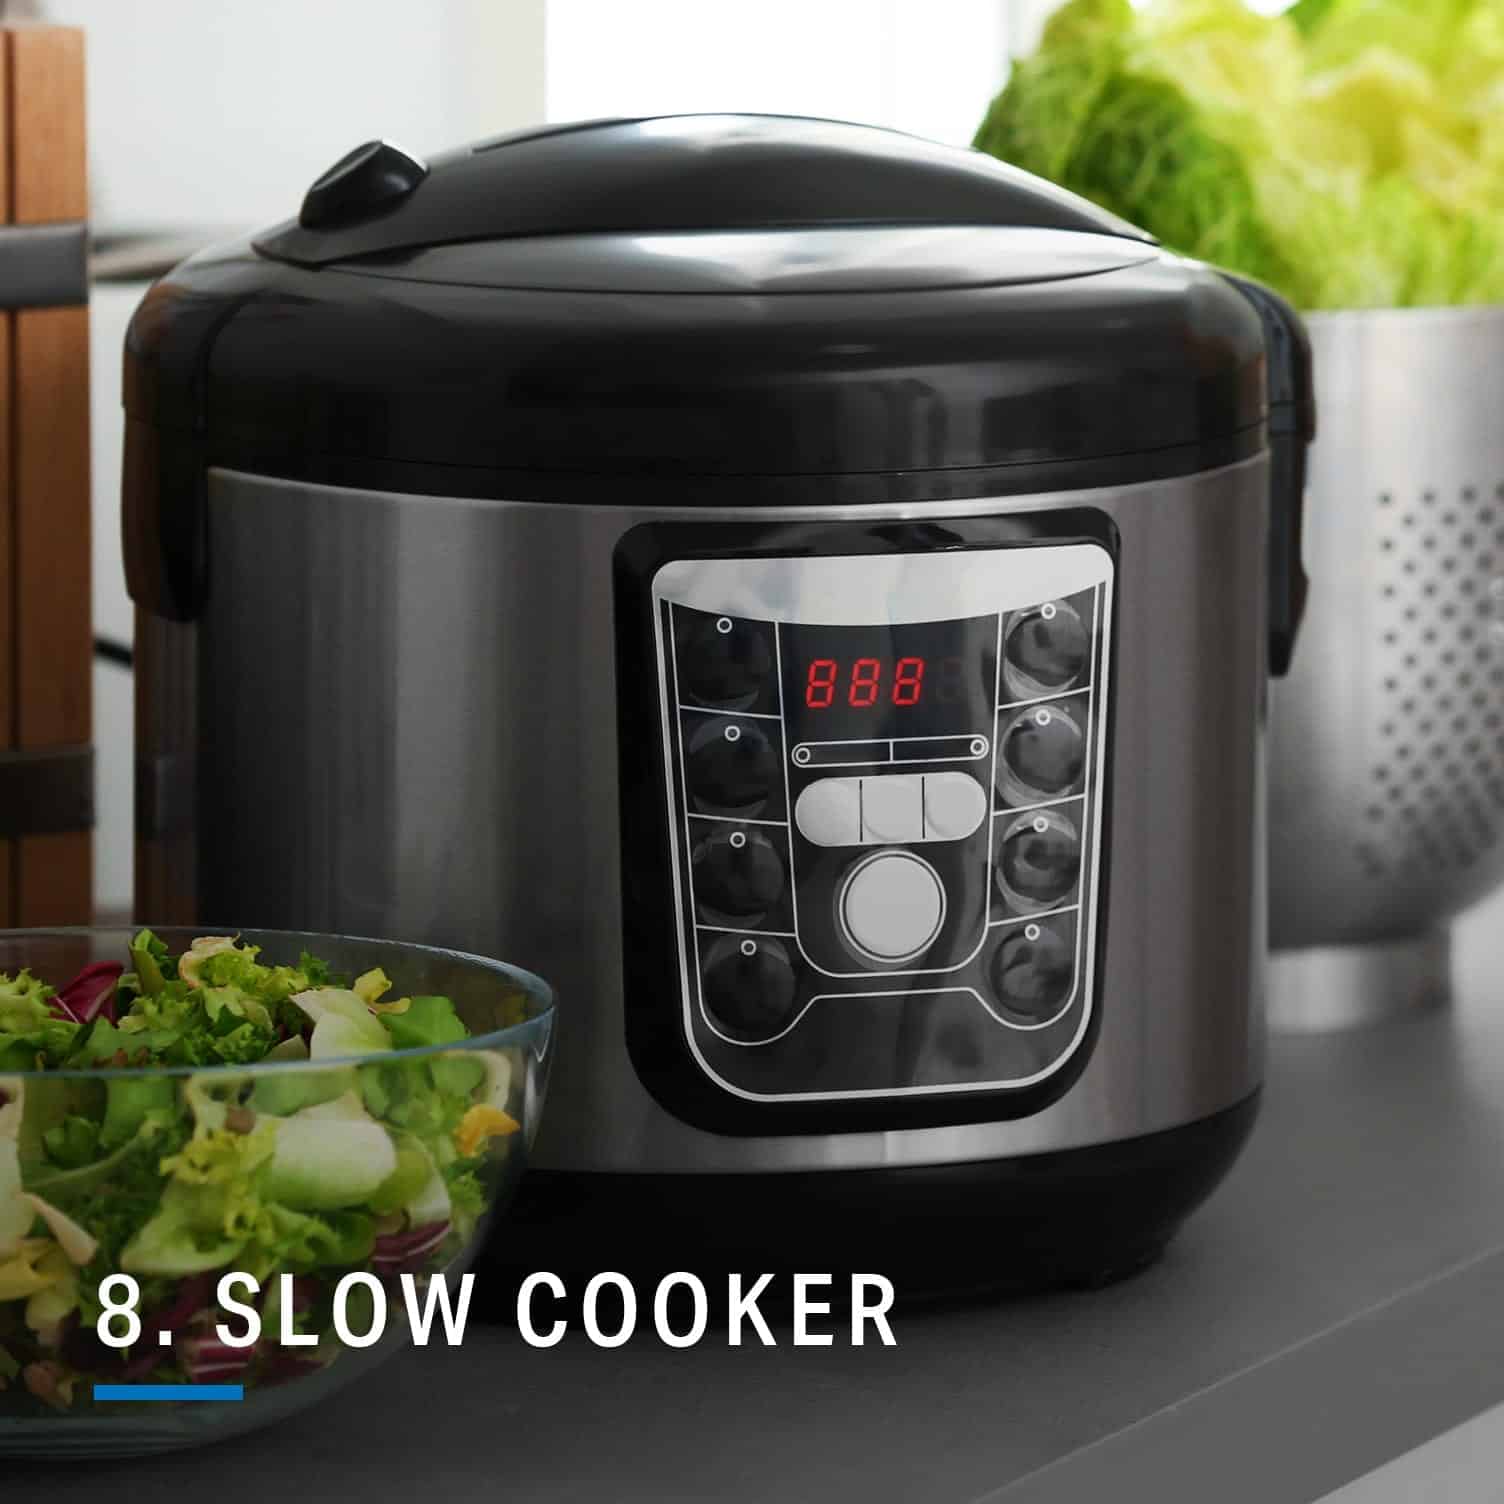 The 13 Best Healthy Kitchen Gadgets, According to a Dietitian